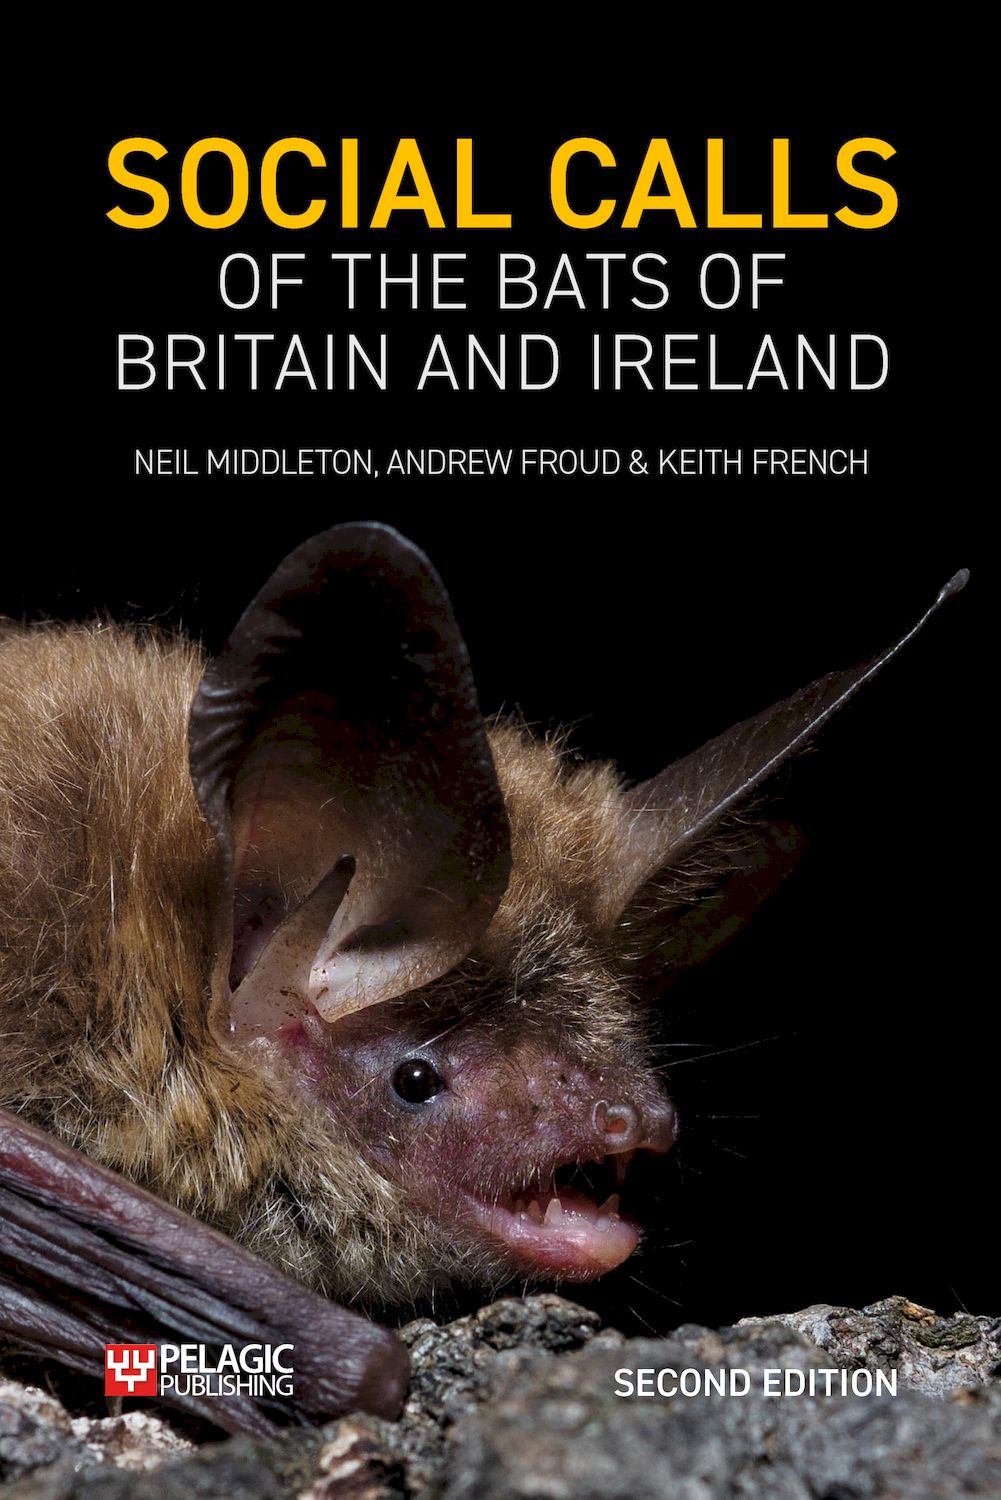 Froud,　9781784273781　Bats　edition　and　2nd　Social　Ireland　Britain　of　French　Publishing　Calls　Pelagic　of　the　Middleton,　–